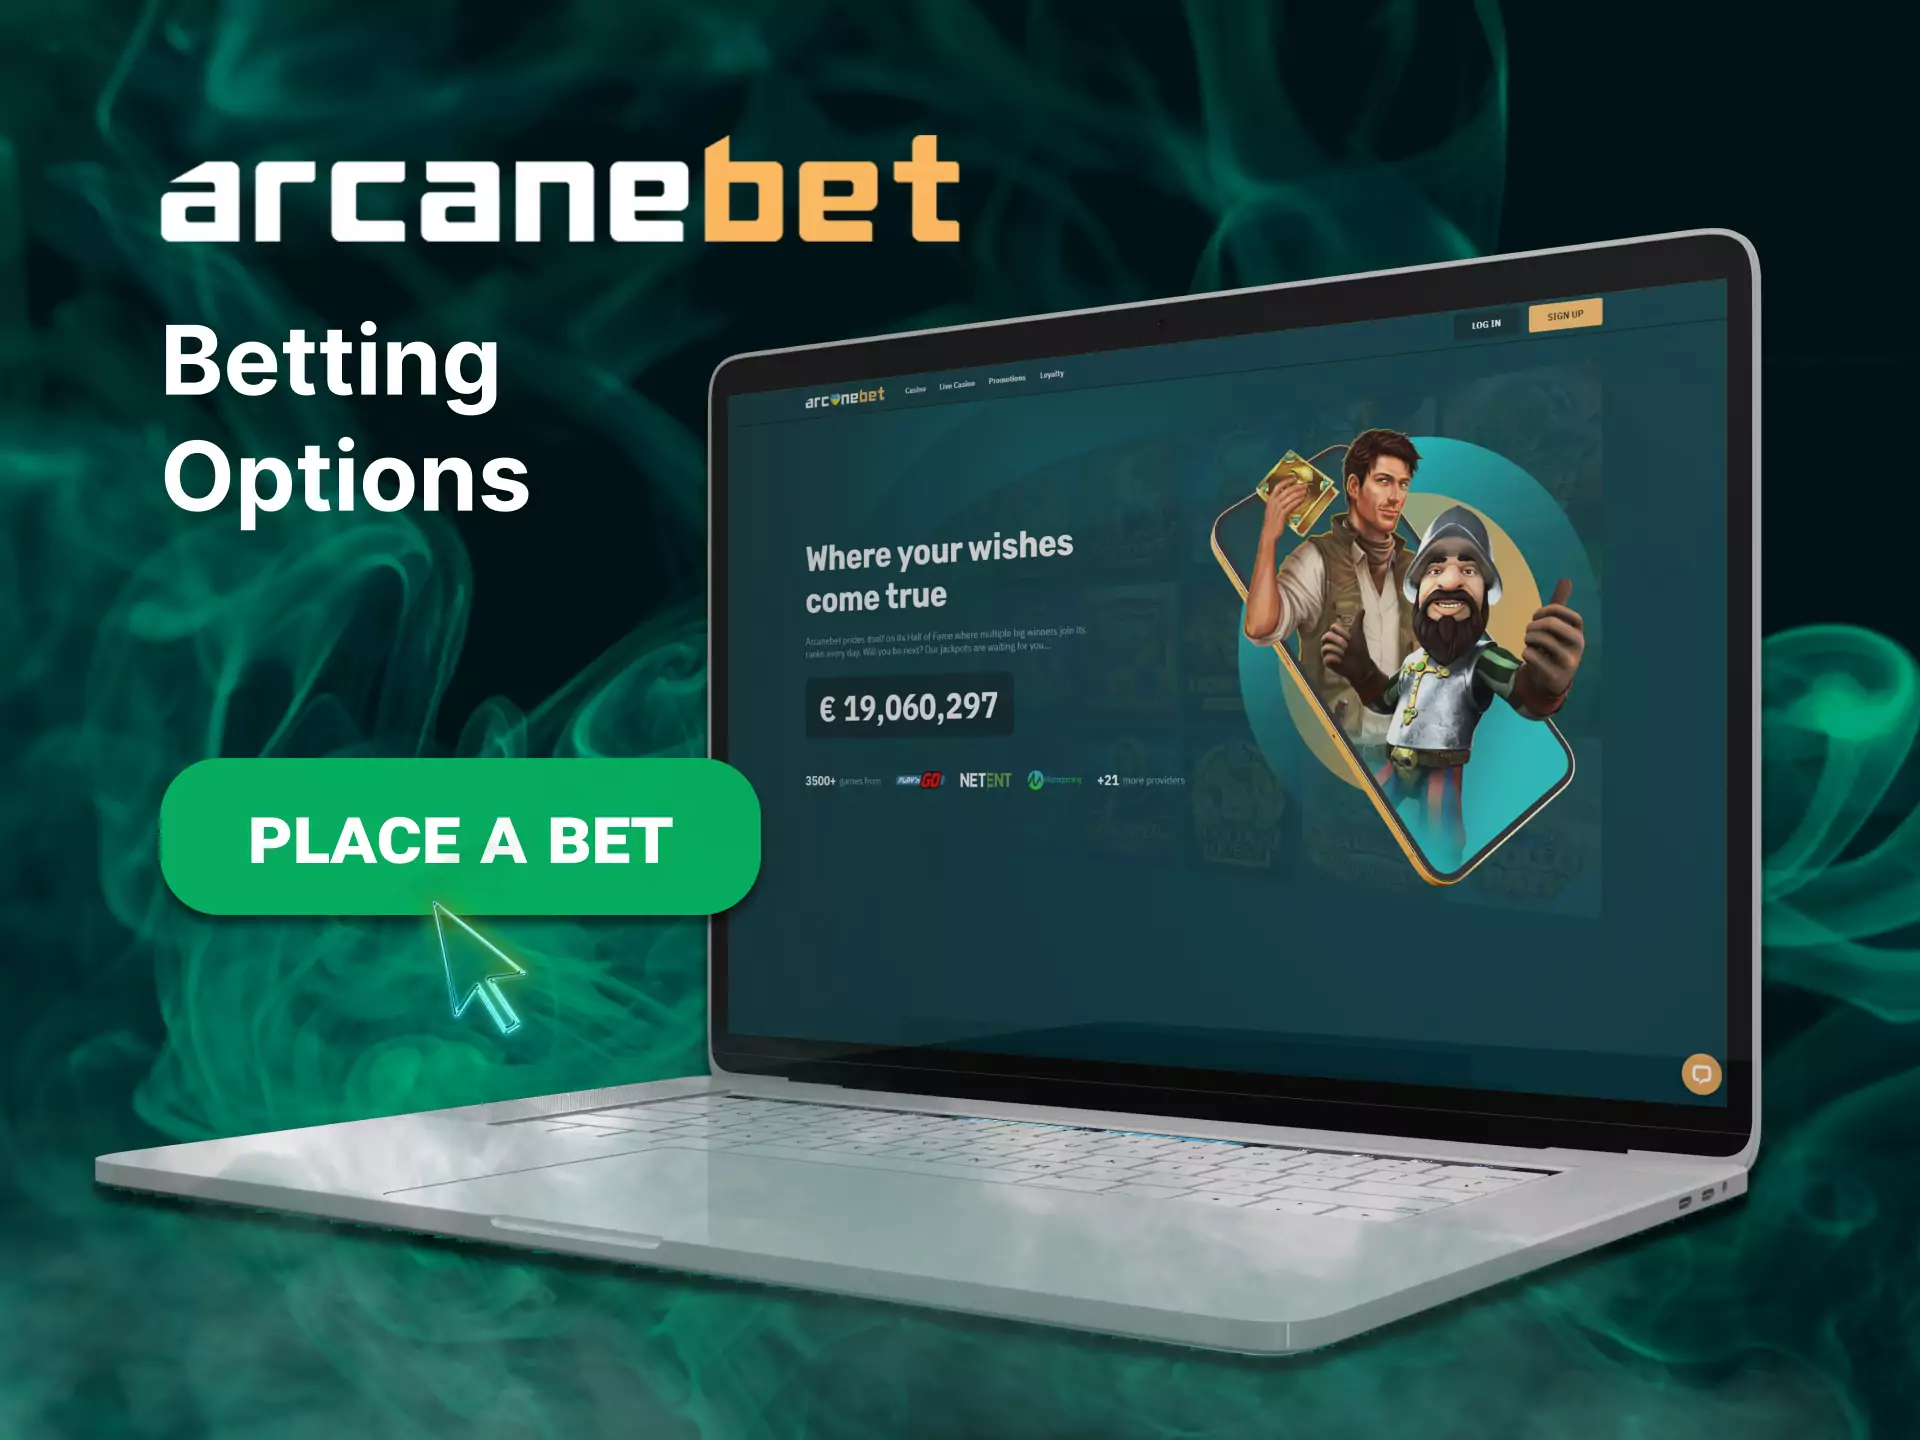 Try different sports betting options in Arcanebet.